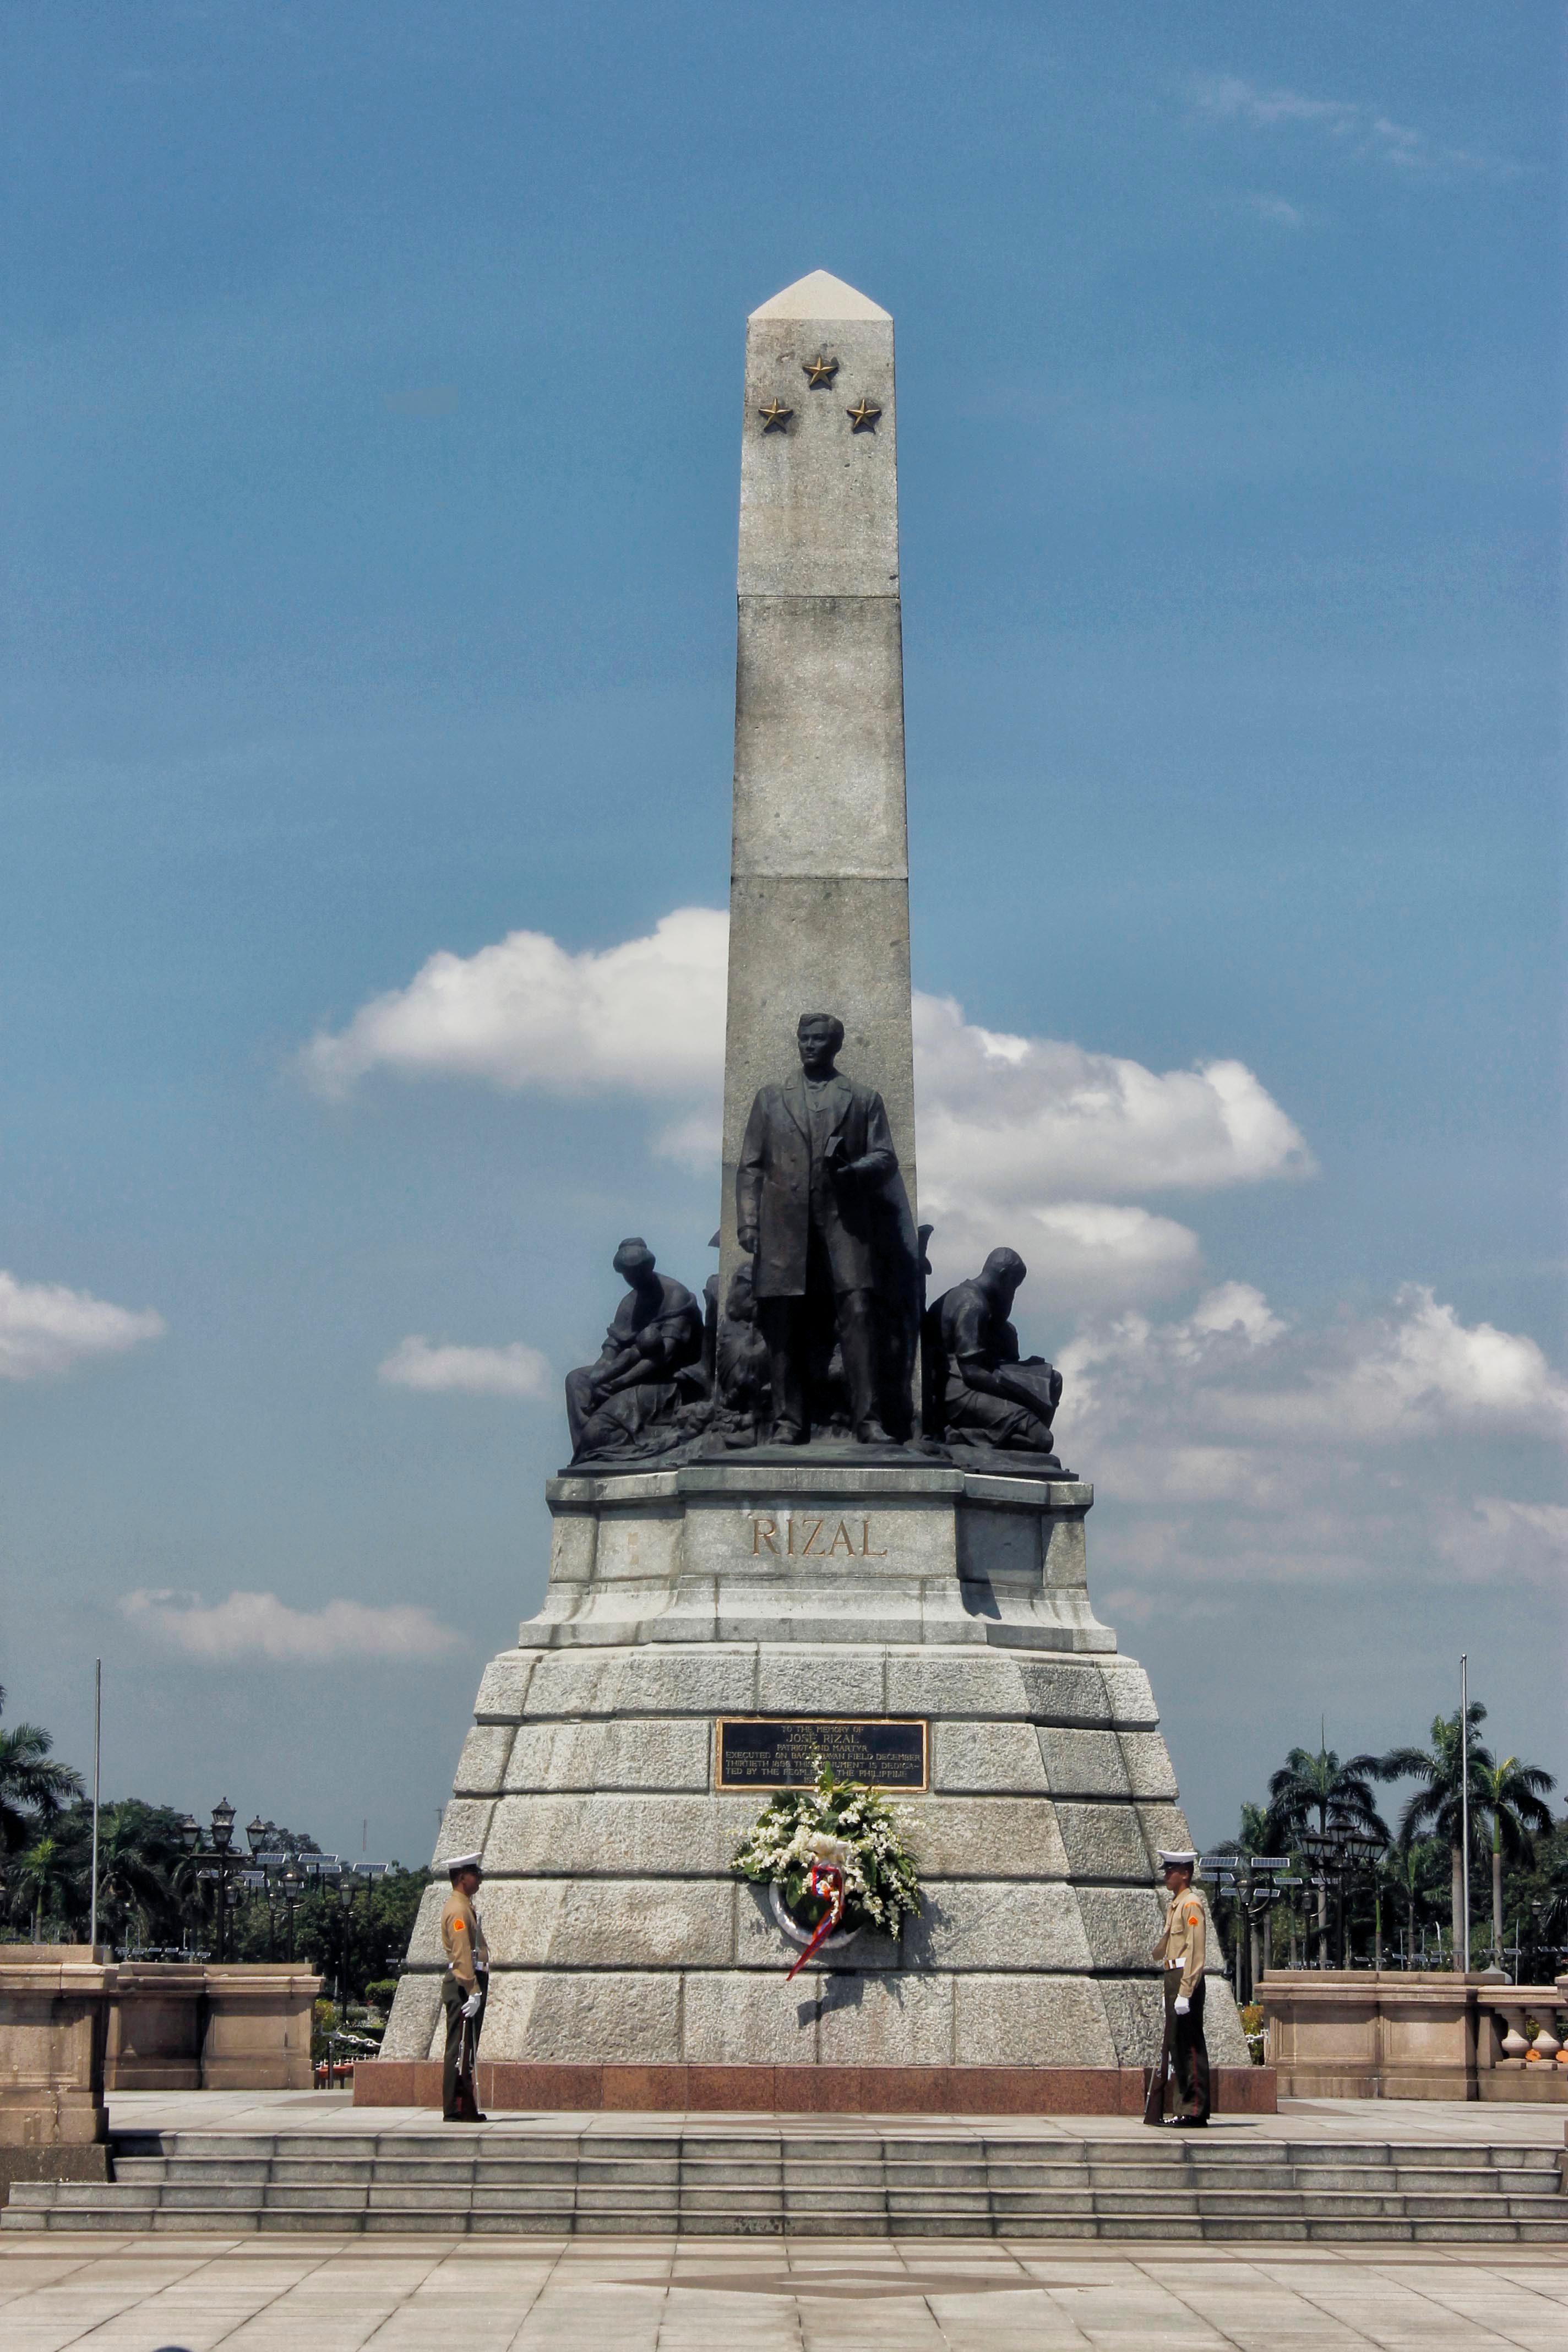 GLORY DAYS. The Rizal Monument is perhaps Manilaâs famous landmark, photographed here before the rise of a photobombing building. Photo by Louie Lapat 